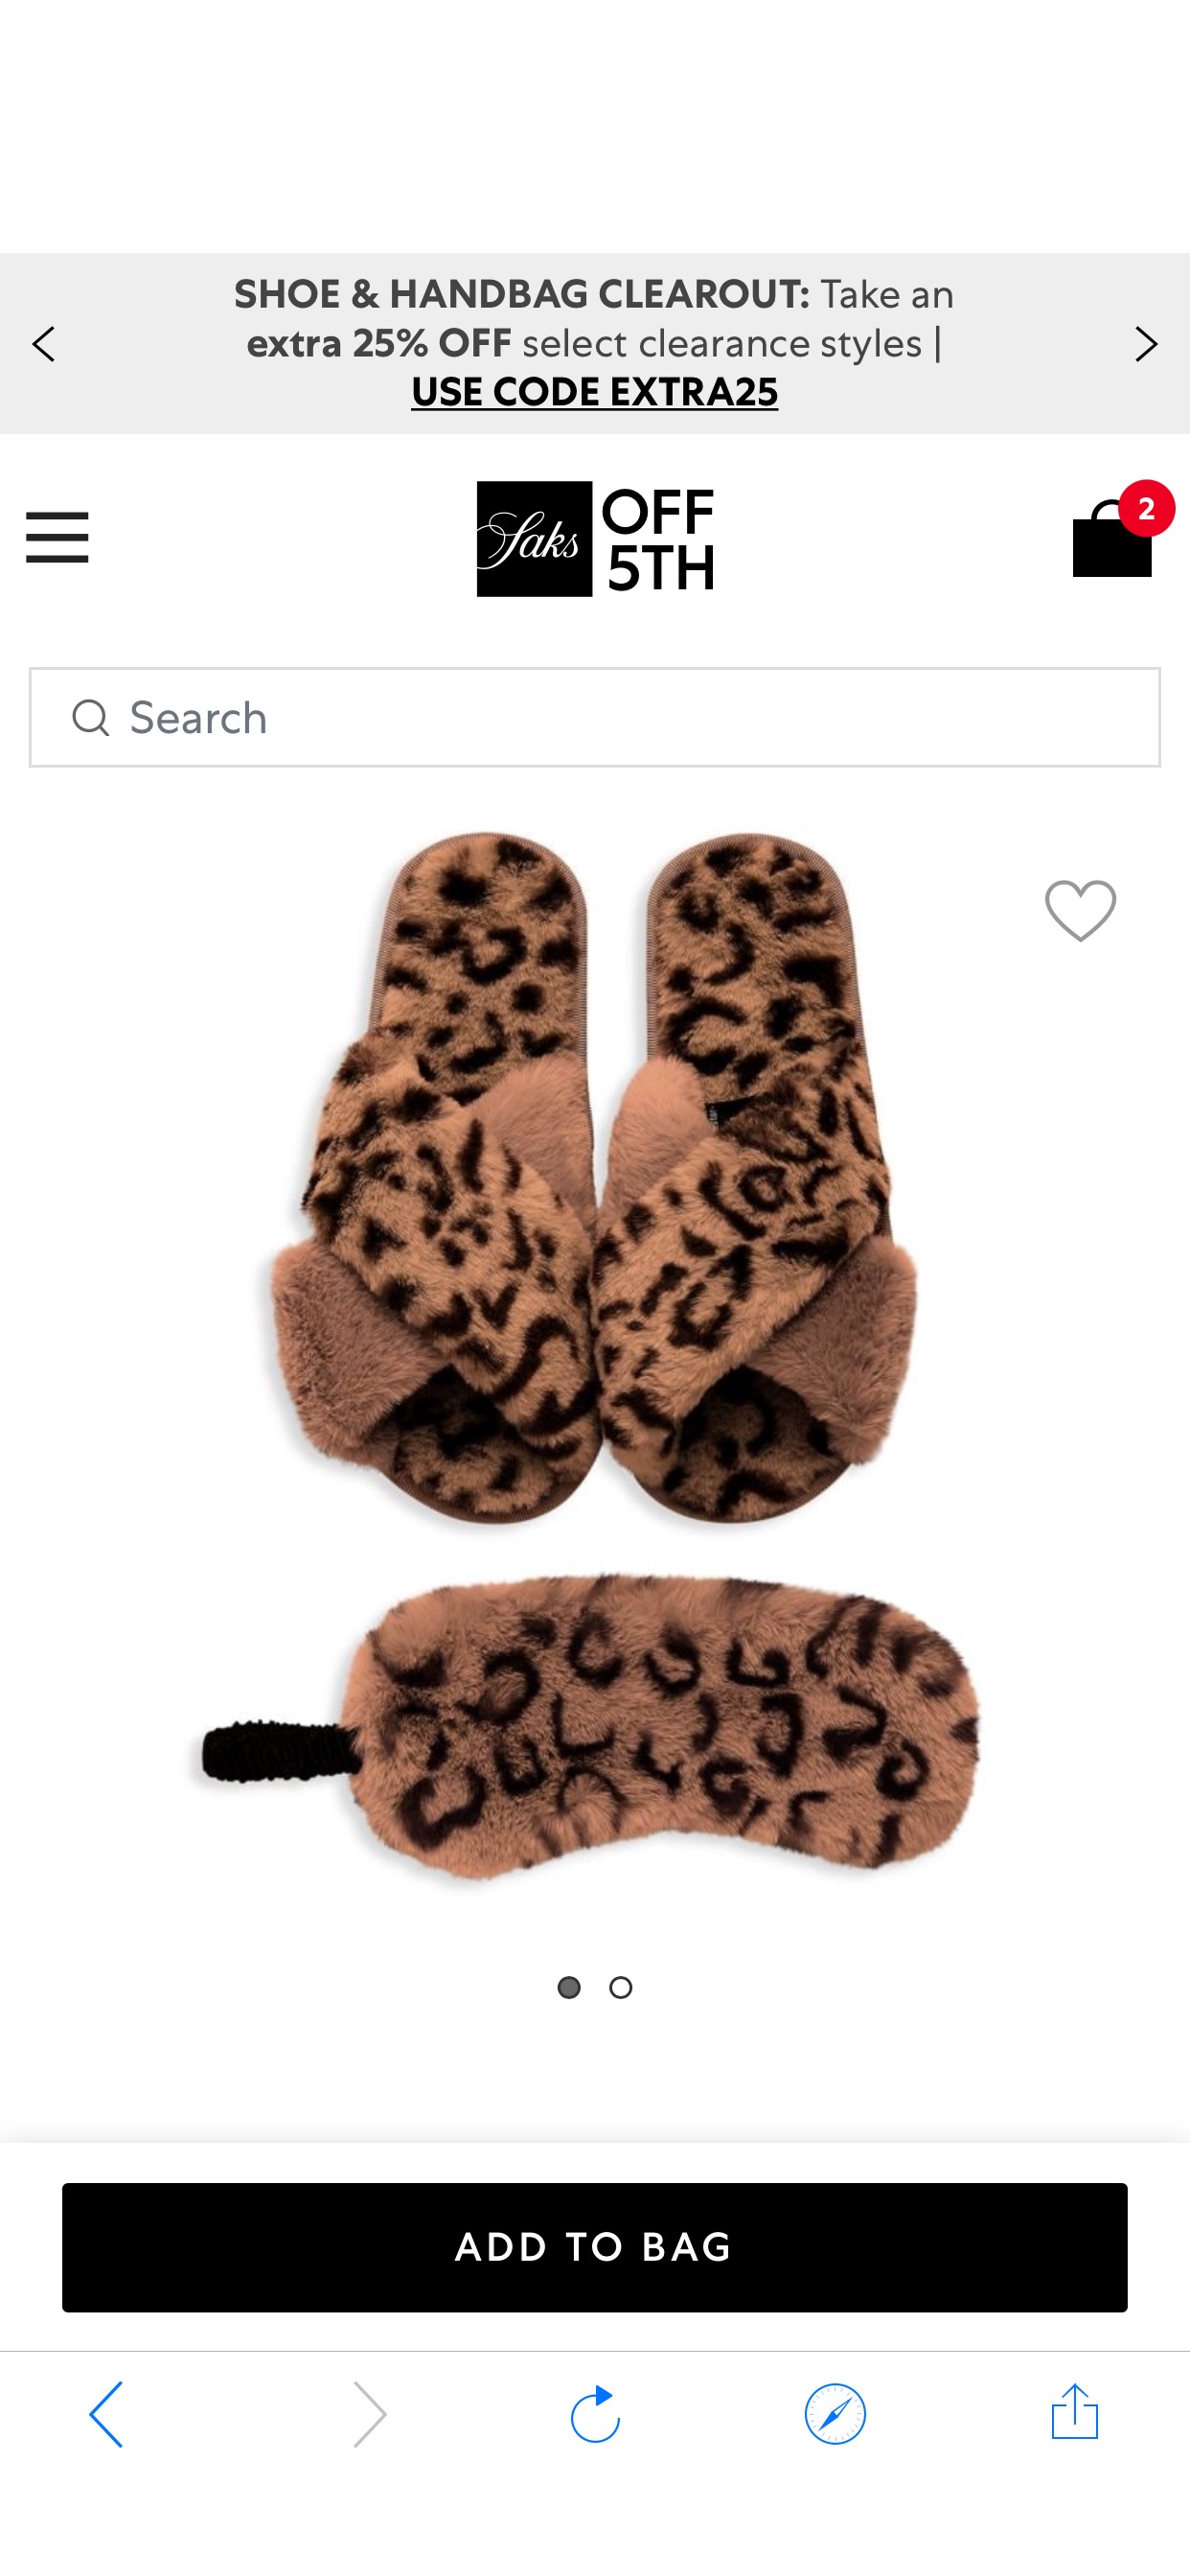 Surell 2-Piece Faux Fur Eye Mask & Slippers Set on SALE | Saks OFF 5TH
拖鞋